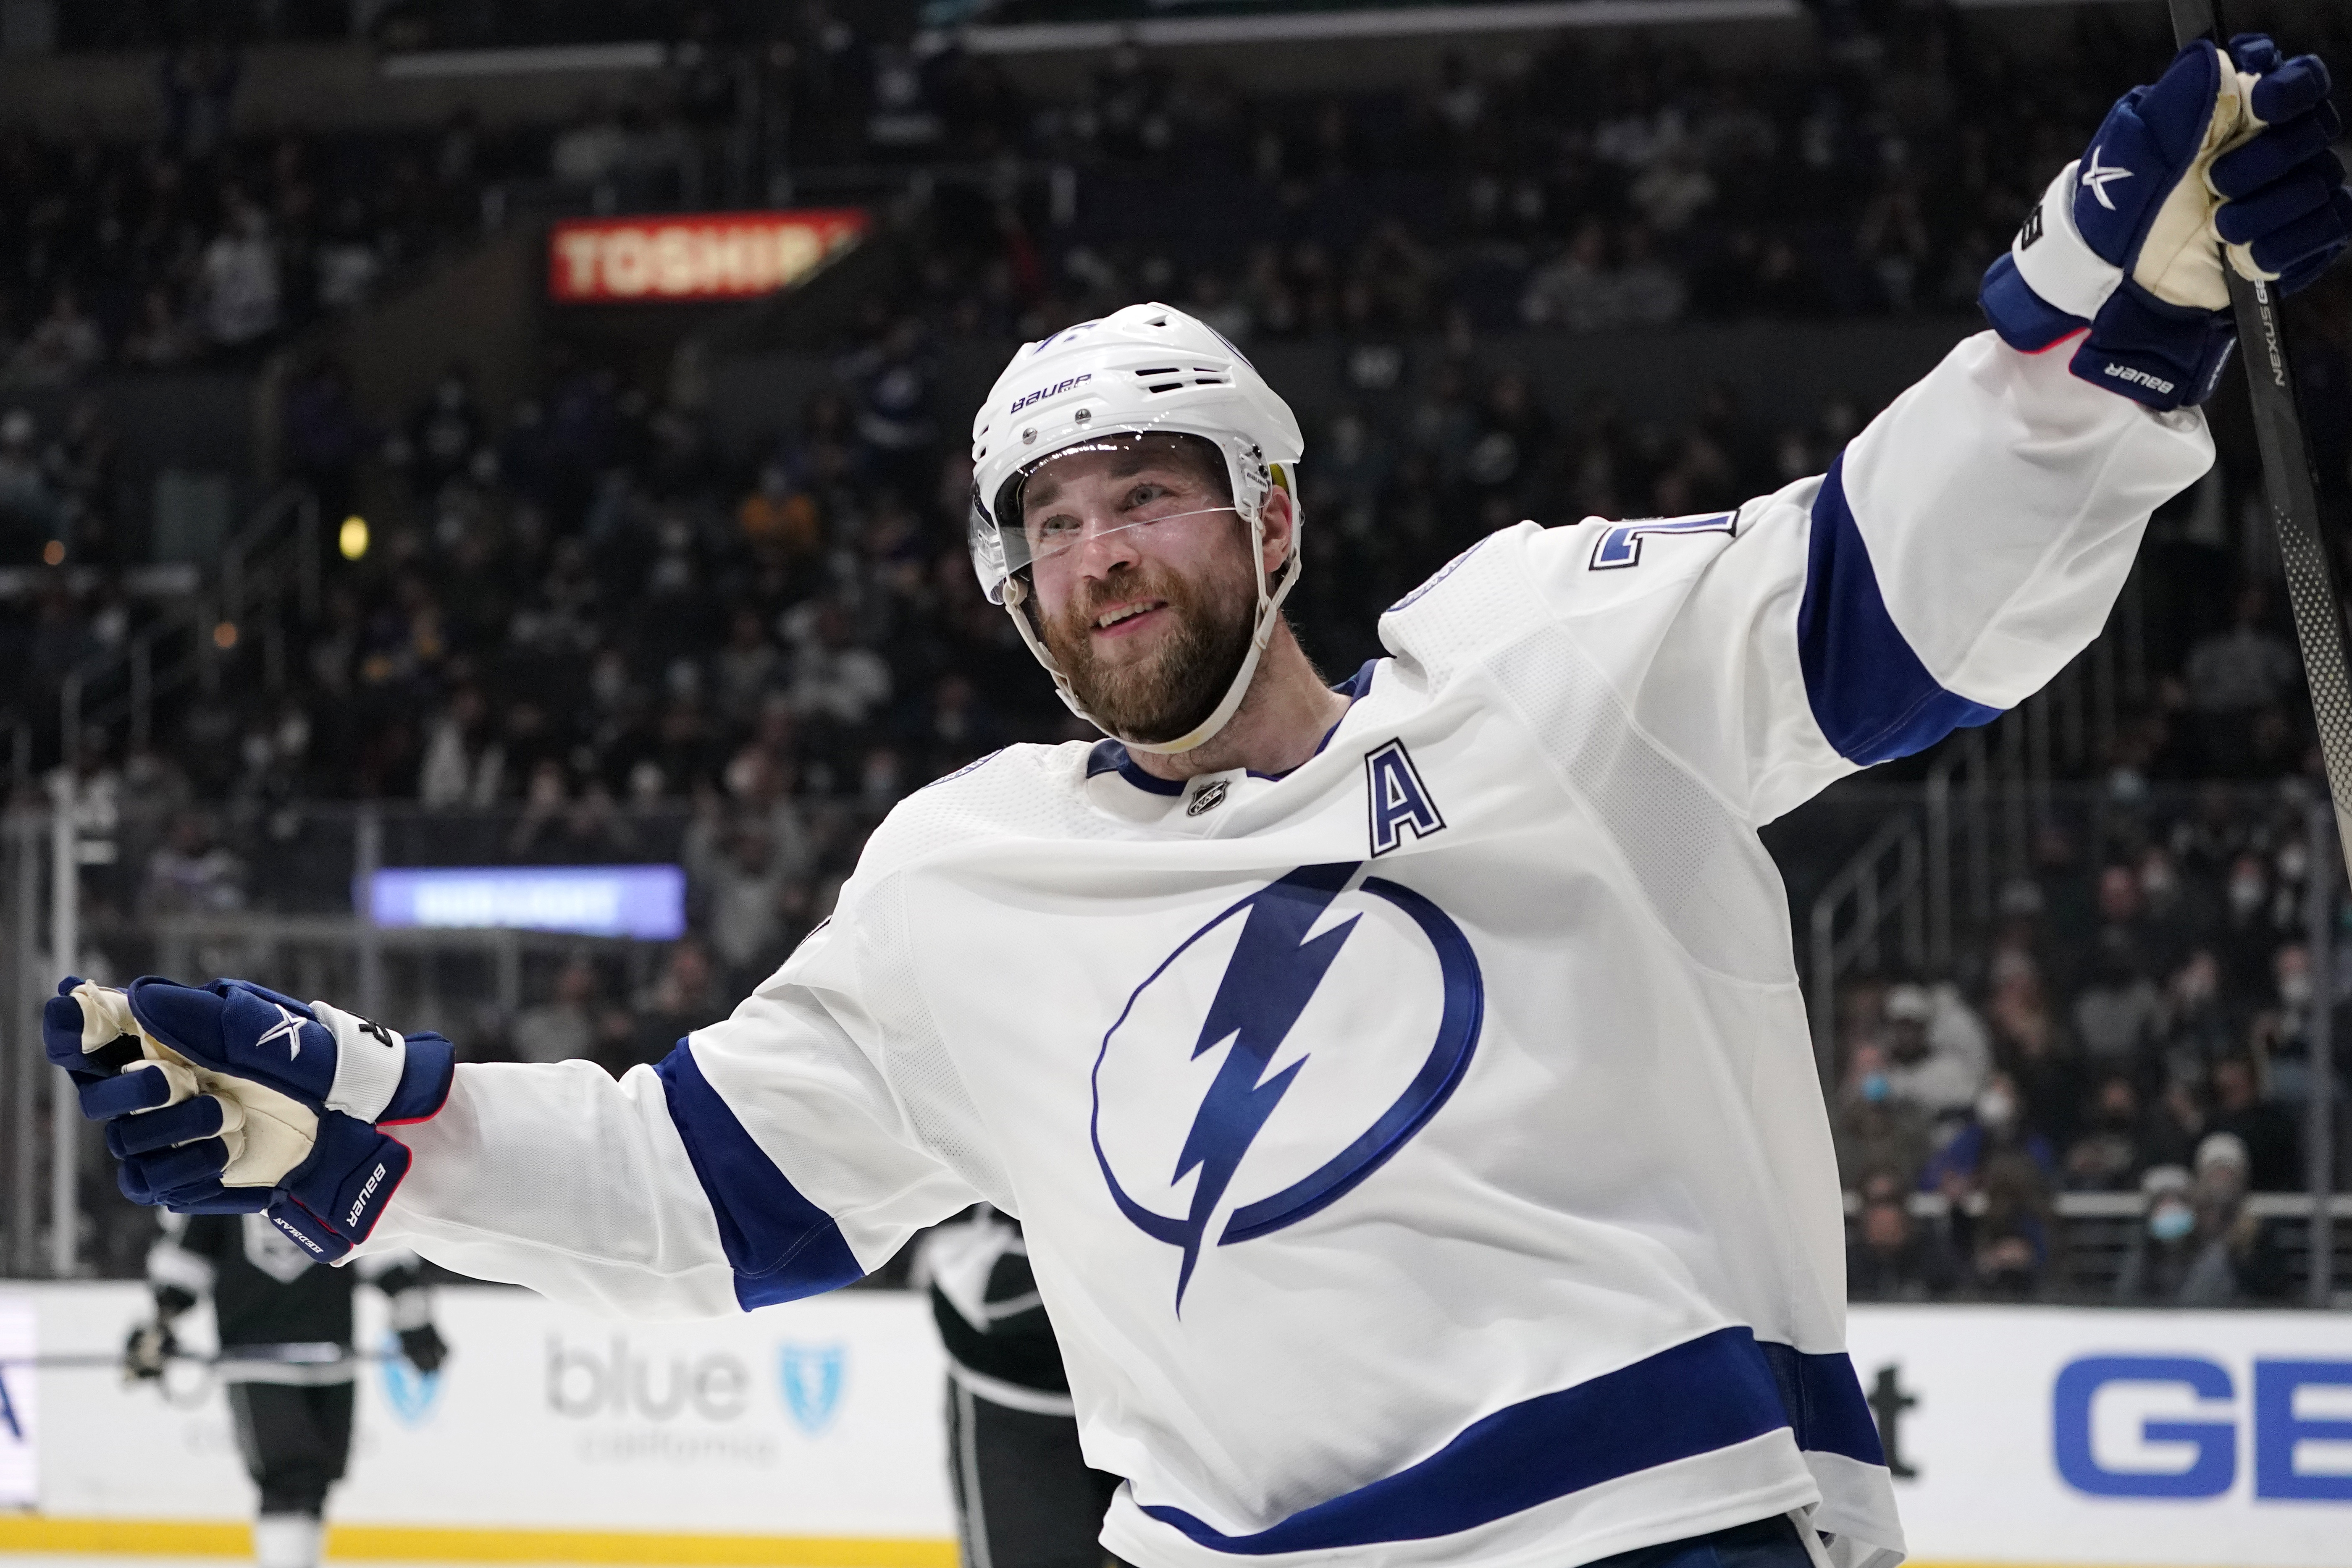 Why has the Lightning's Victor Hedman struggled defensively this season?